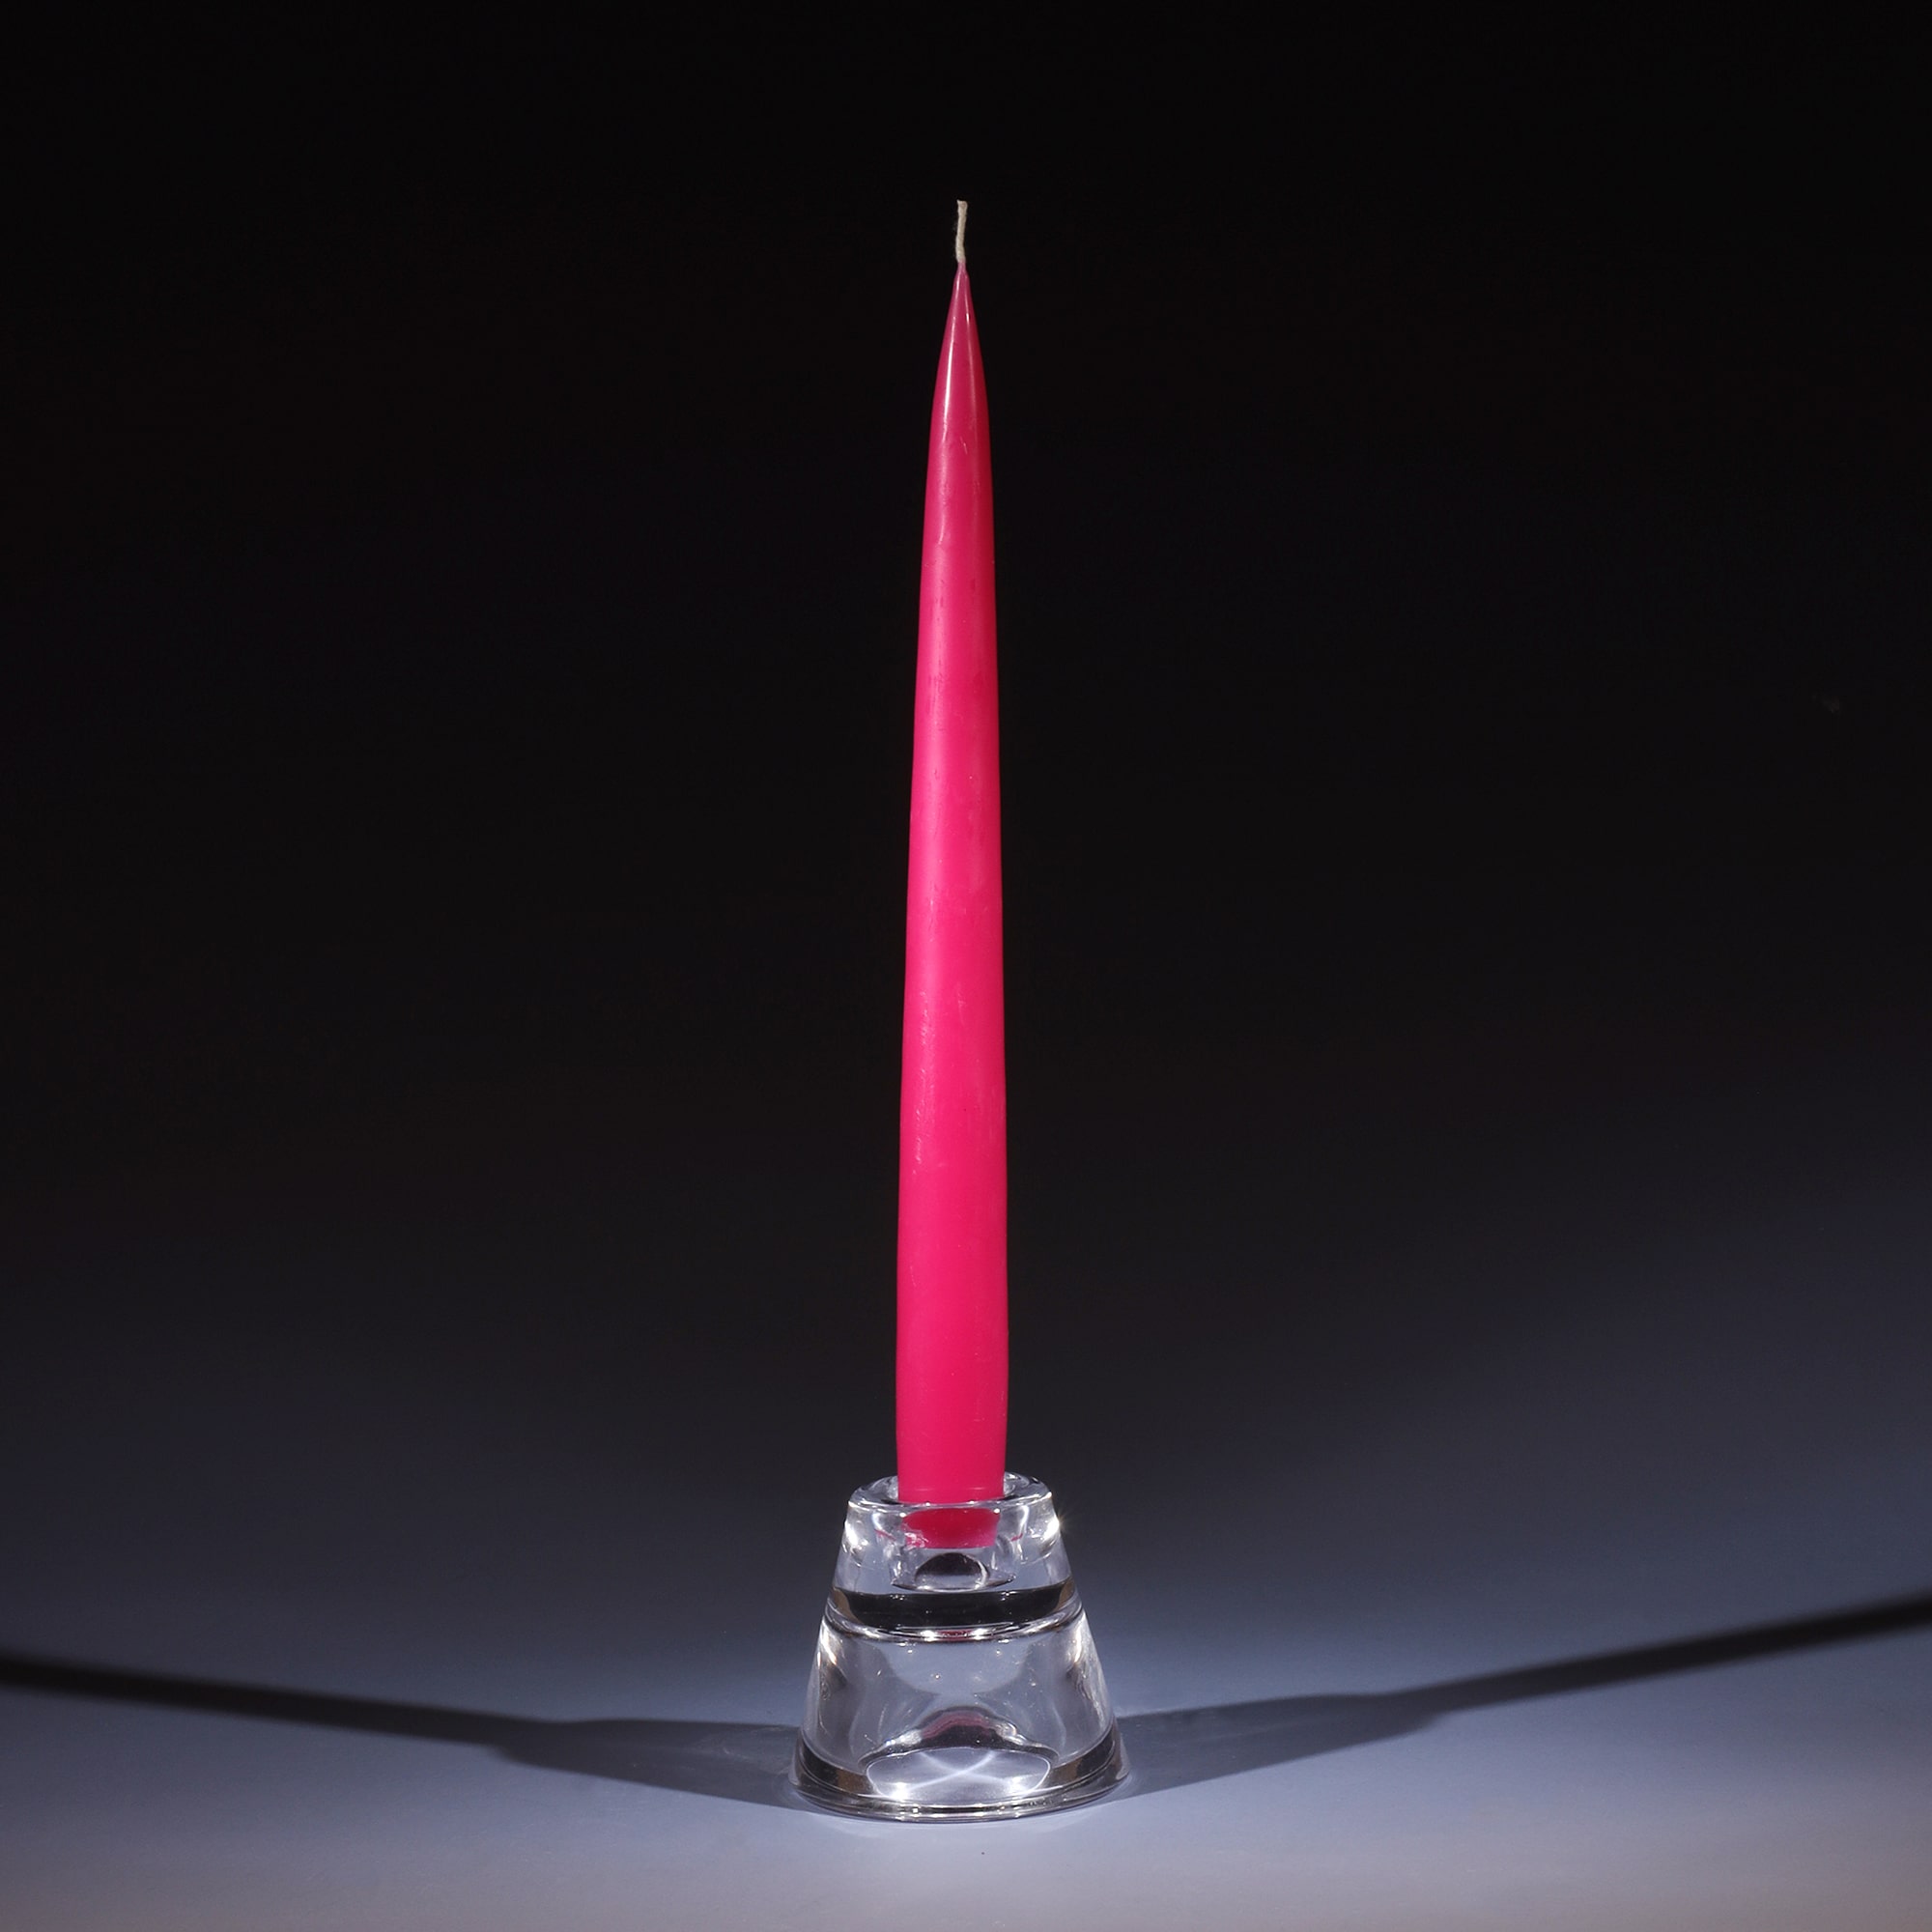 Taper candle: Where to buy long dinner candles